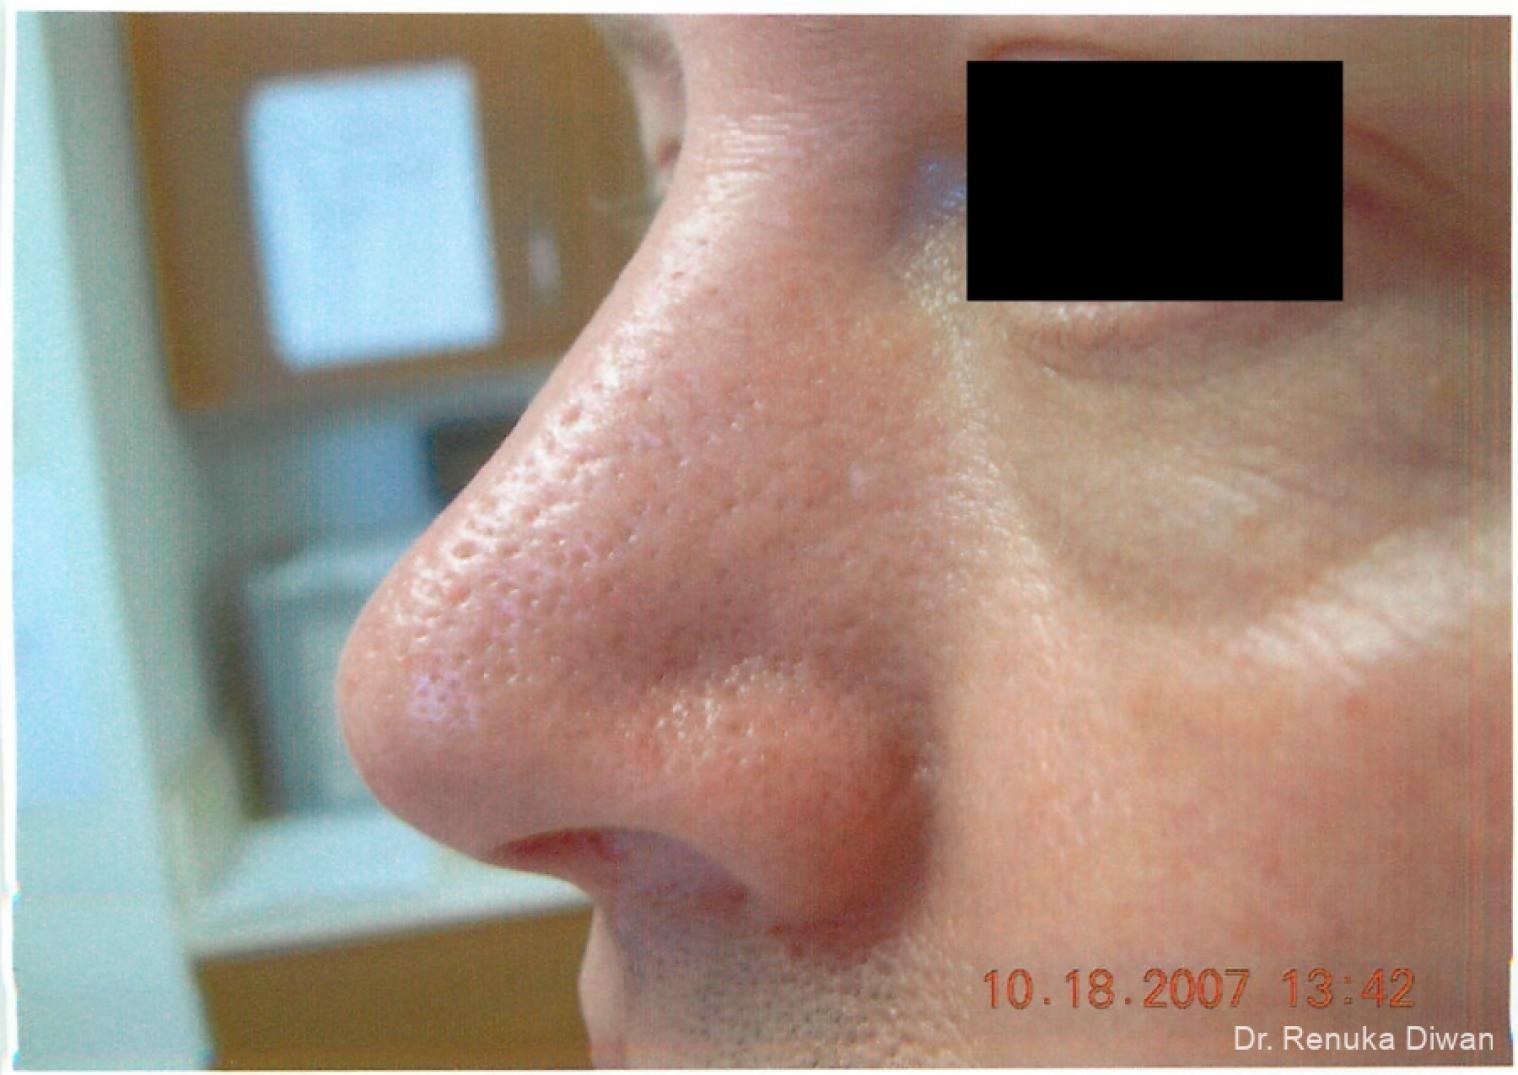 Laser For Veins And Redness For Men: Patient 1 - After 1